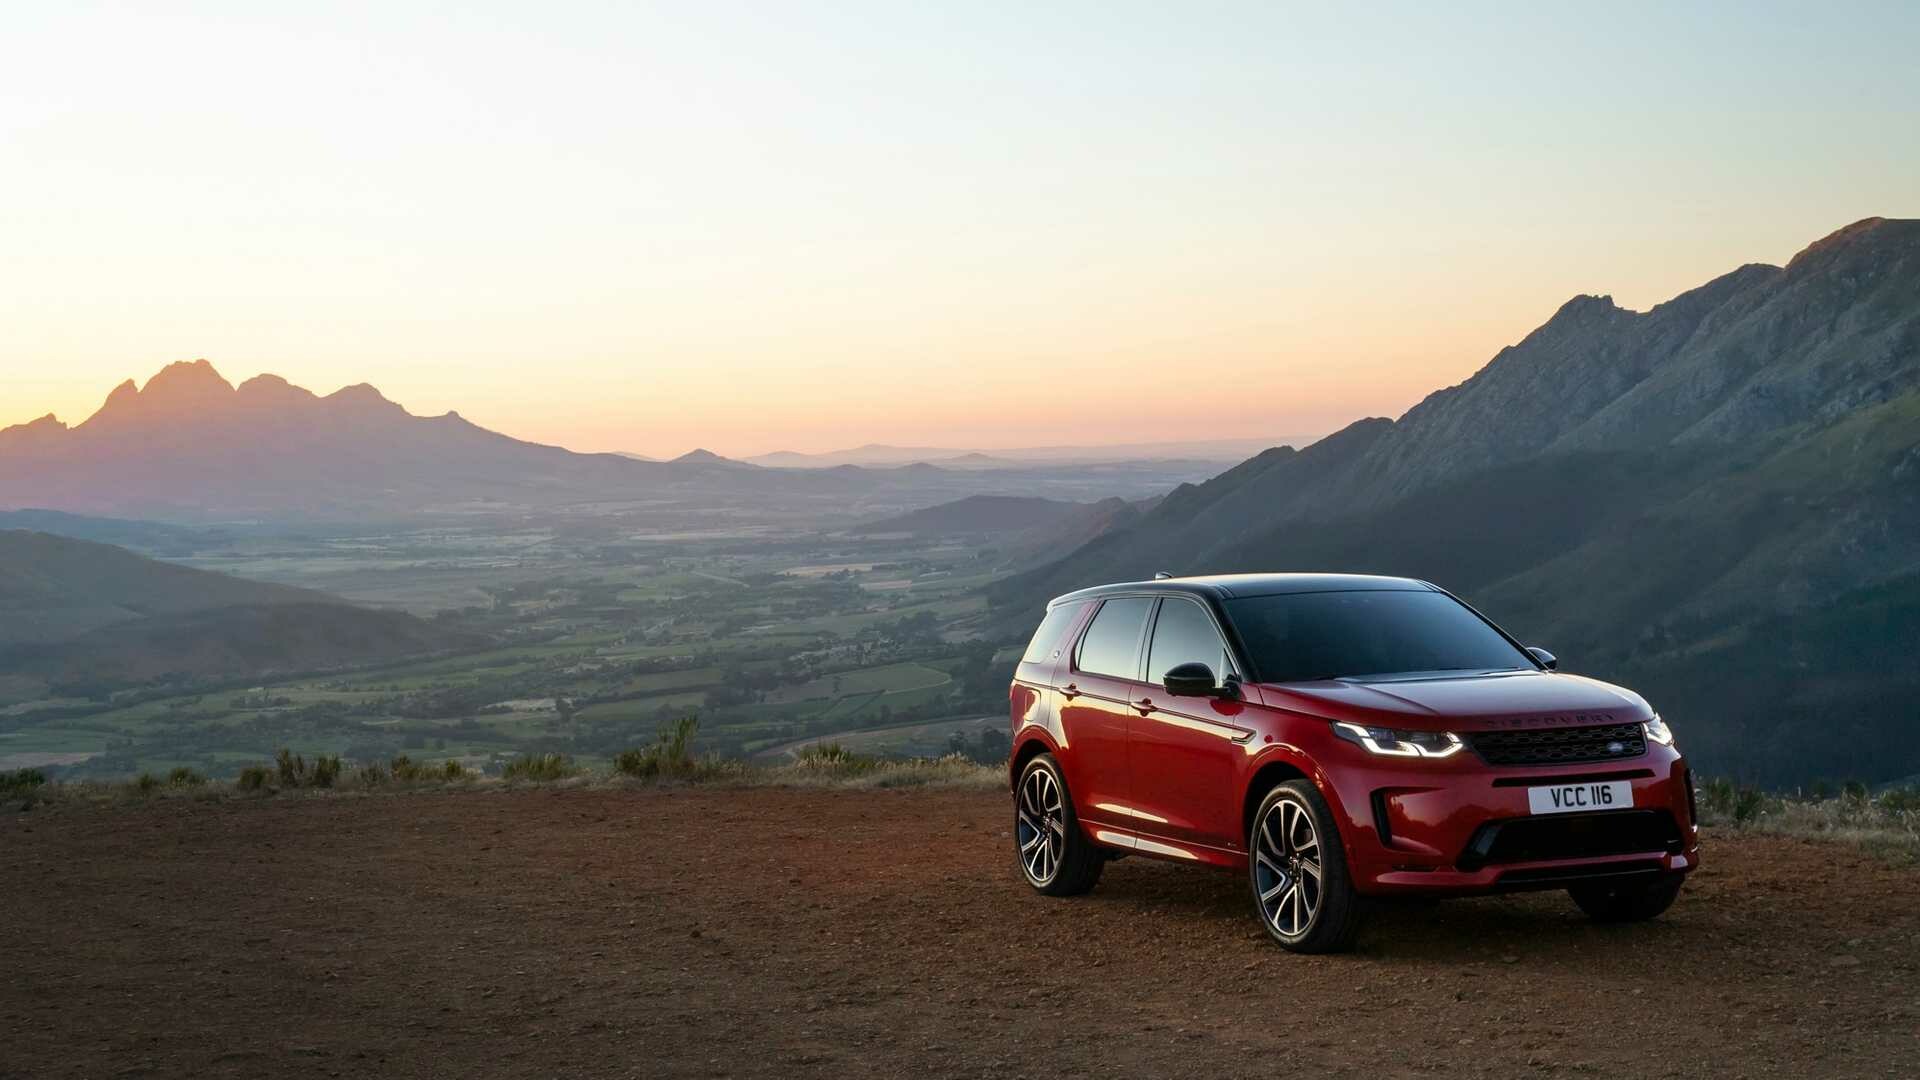 Land Rover: 2020 Discovery Sport, The model Evoque was introduced in 2011. 1920x1080 Full HD Background.